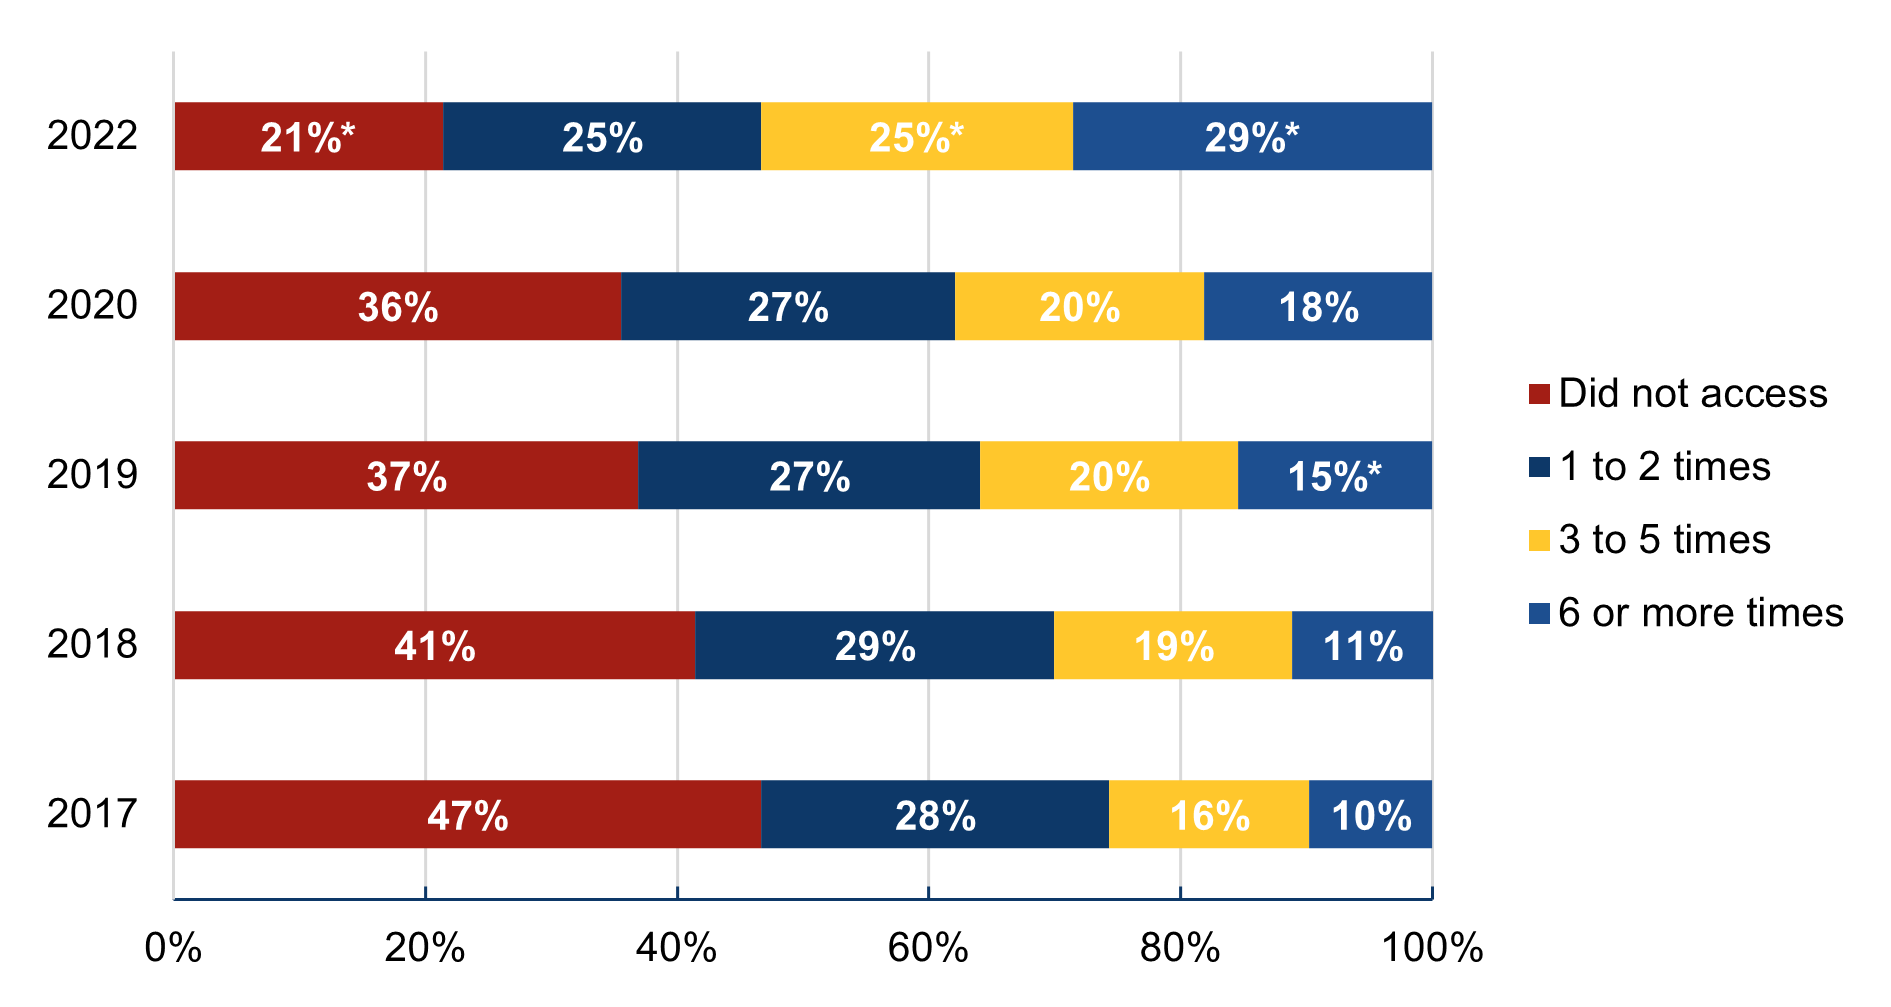 This figure contains stacked horizontal bar charts for the years 2017, 2018, 2019, 2020, and 2022 showing the percent of individuals who did not access their online medical records, accessed them 1 to 2 times, accessed them 3 to 5 times, and accessed them 6 or more times, among those who were offered online access to their medical records by a healthcare provider or insurer. The y-axis displays the years 2017-2022, and the x-axis values show 0 percent to 100 percent, representing the percentage of individuals that reported each level of access to their online medical records. 
The bar for 2017 shows that 47 percent of individuals offered access to their online medical records or patient portal reported that they did not access them, 28 percent reported accessing them 1 to 2 times, 16 percent reported accessing these online records 3 to 5 times, and the remaining 10 percent reported accessing them 6 or more times. 
The bar for 2018 shows that 41 percent of individuals offered access to their online medical records or patient portal reported that they did not access them, 29 percent reported accessing them 1 to 2 times, 19 percent reported accessing these online records 3 to 5 times, and the remaining 11 percent reported accessing them 6 or more times.
The bar for 2019 shows that 37 percent of individuals offered access to their online medical records or patient portal reported that they did not access them, 27 percent reported accessing them 1 to 2 times, 20 percent reported accessing these online records 3 to 5 times, and the remaining 15 percent reported accessing them 6 or more times (representing a statistically significant increase from 2018).

The bar for 2020 shows that 36 percent of individuals offered access to their online medical records or patient portal reported that they did not access them, 27 percent reported accessing them 1 to 2 times, 20 percent reported accessing these online records 3 to 5 times, and the remaining 18 percent reported accessing them 6 or more times.
The bar for 2022 shows that 21 percent of individuals offered access to their online medical records or patient portal reported that they did not access them (a statistically significant decrease from 2020), 25 percent reported accessing them 1 to 2 times, 25 percent reported accessing these online records 3 to 5 times (representing a statistically significant increase from 2020), and the remaining 29 percent reported accessing them 6 or more times (a statistically significant increase from 2020).
